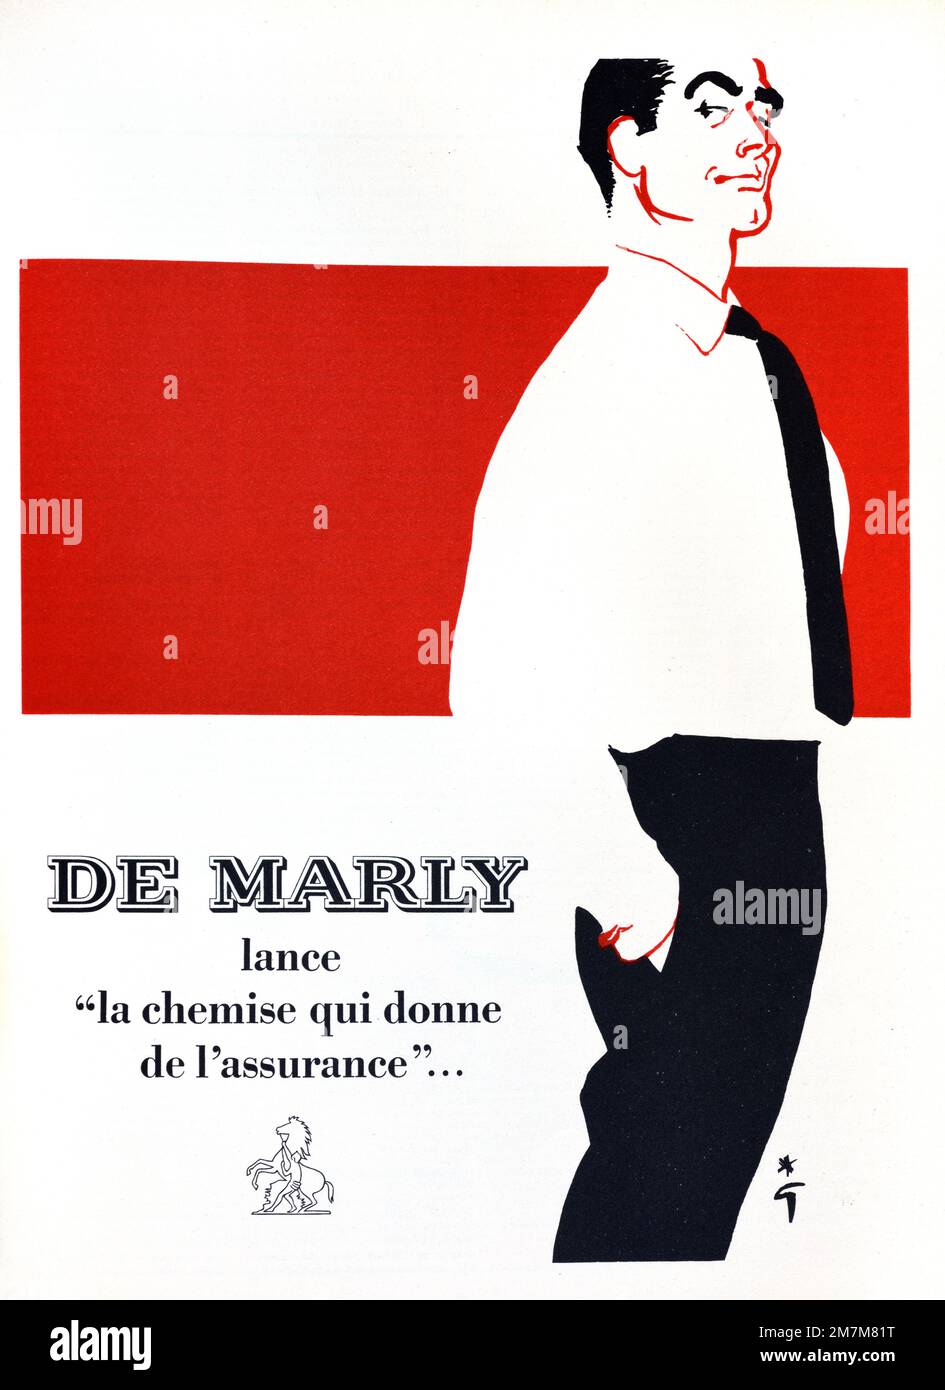 Vintage or Old Advert, Advertisement, Publicity or Illustration for de Marly Shirt, Men's Shirts or Business Shirts Advert 1956. Illustrated with Silhouette of 1950s Man Stock Photo